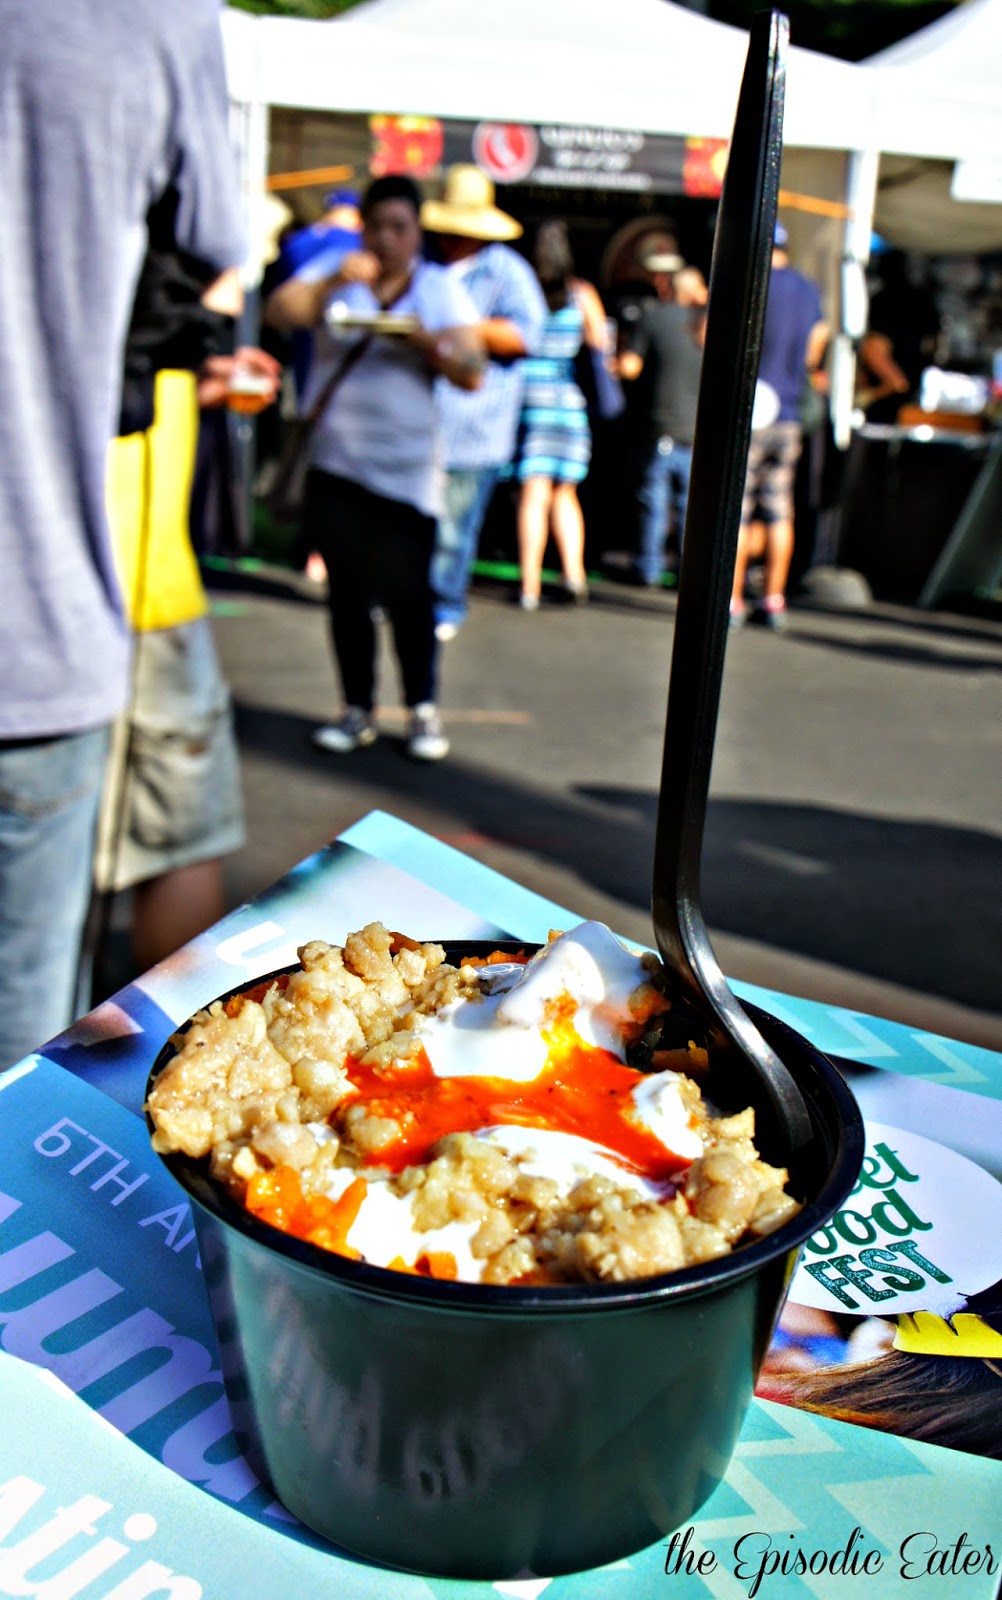 L.A. Street Food Fest (Pasadena, CA) on The Episodic Eater